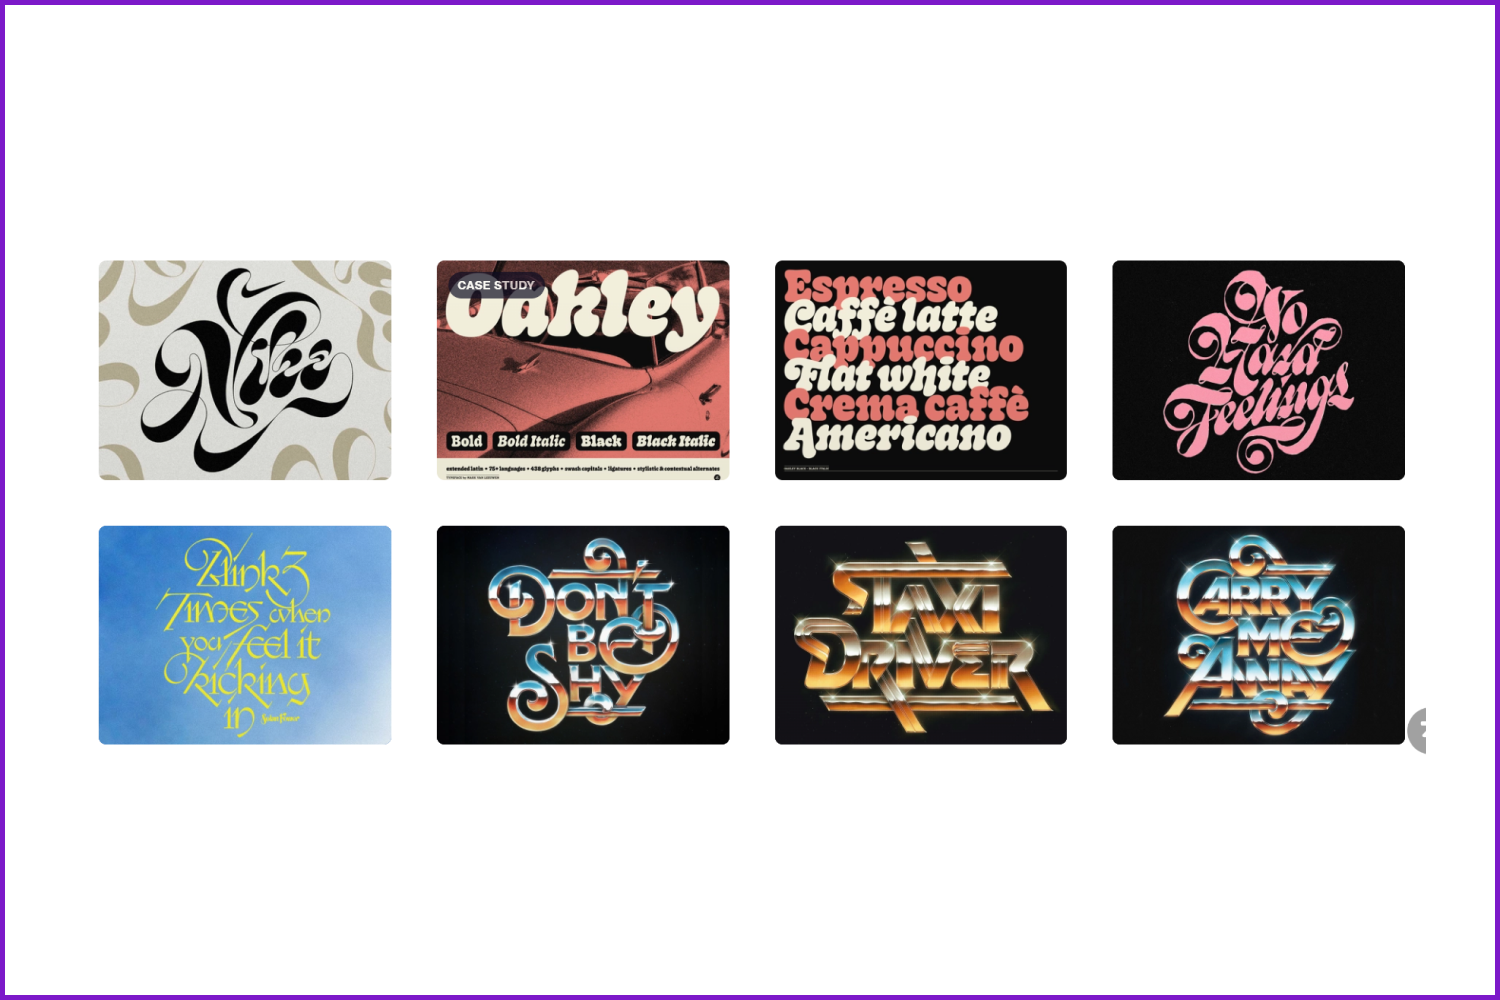 A collage of images of font variants created by Mark van Leeuwen.